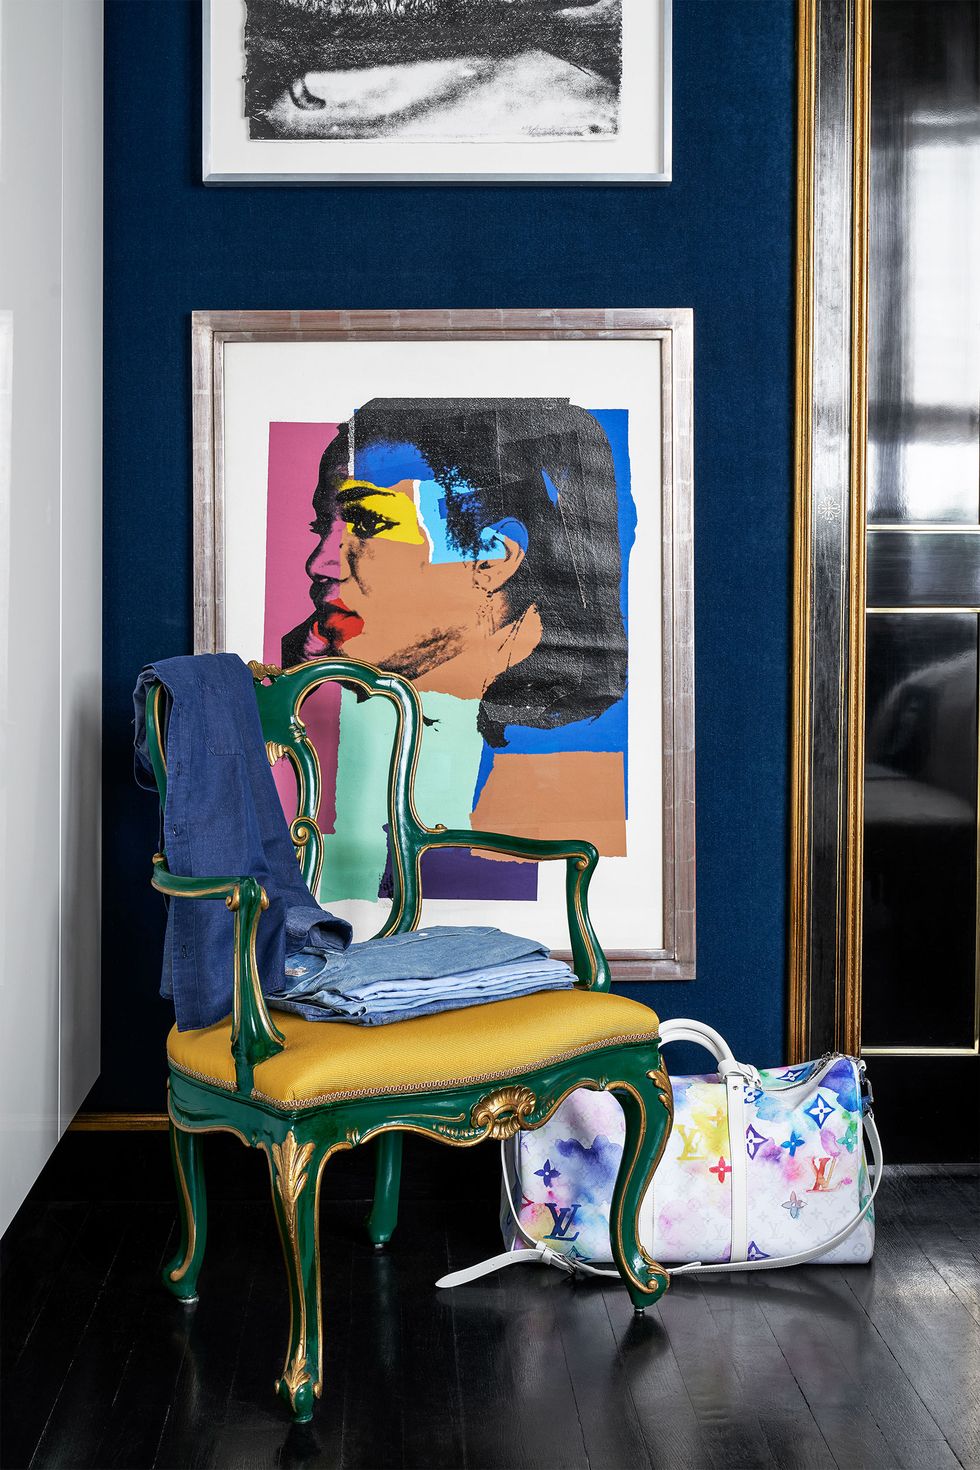 in a bedroom corner is a vintage chair with a green curvy frame and gold fabric seat with folded clothing , a colorful weekend bag sits on a dark wood floor, blue velvet walls with a collage of a woman's face